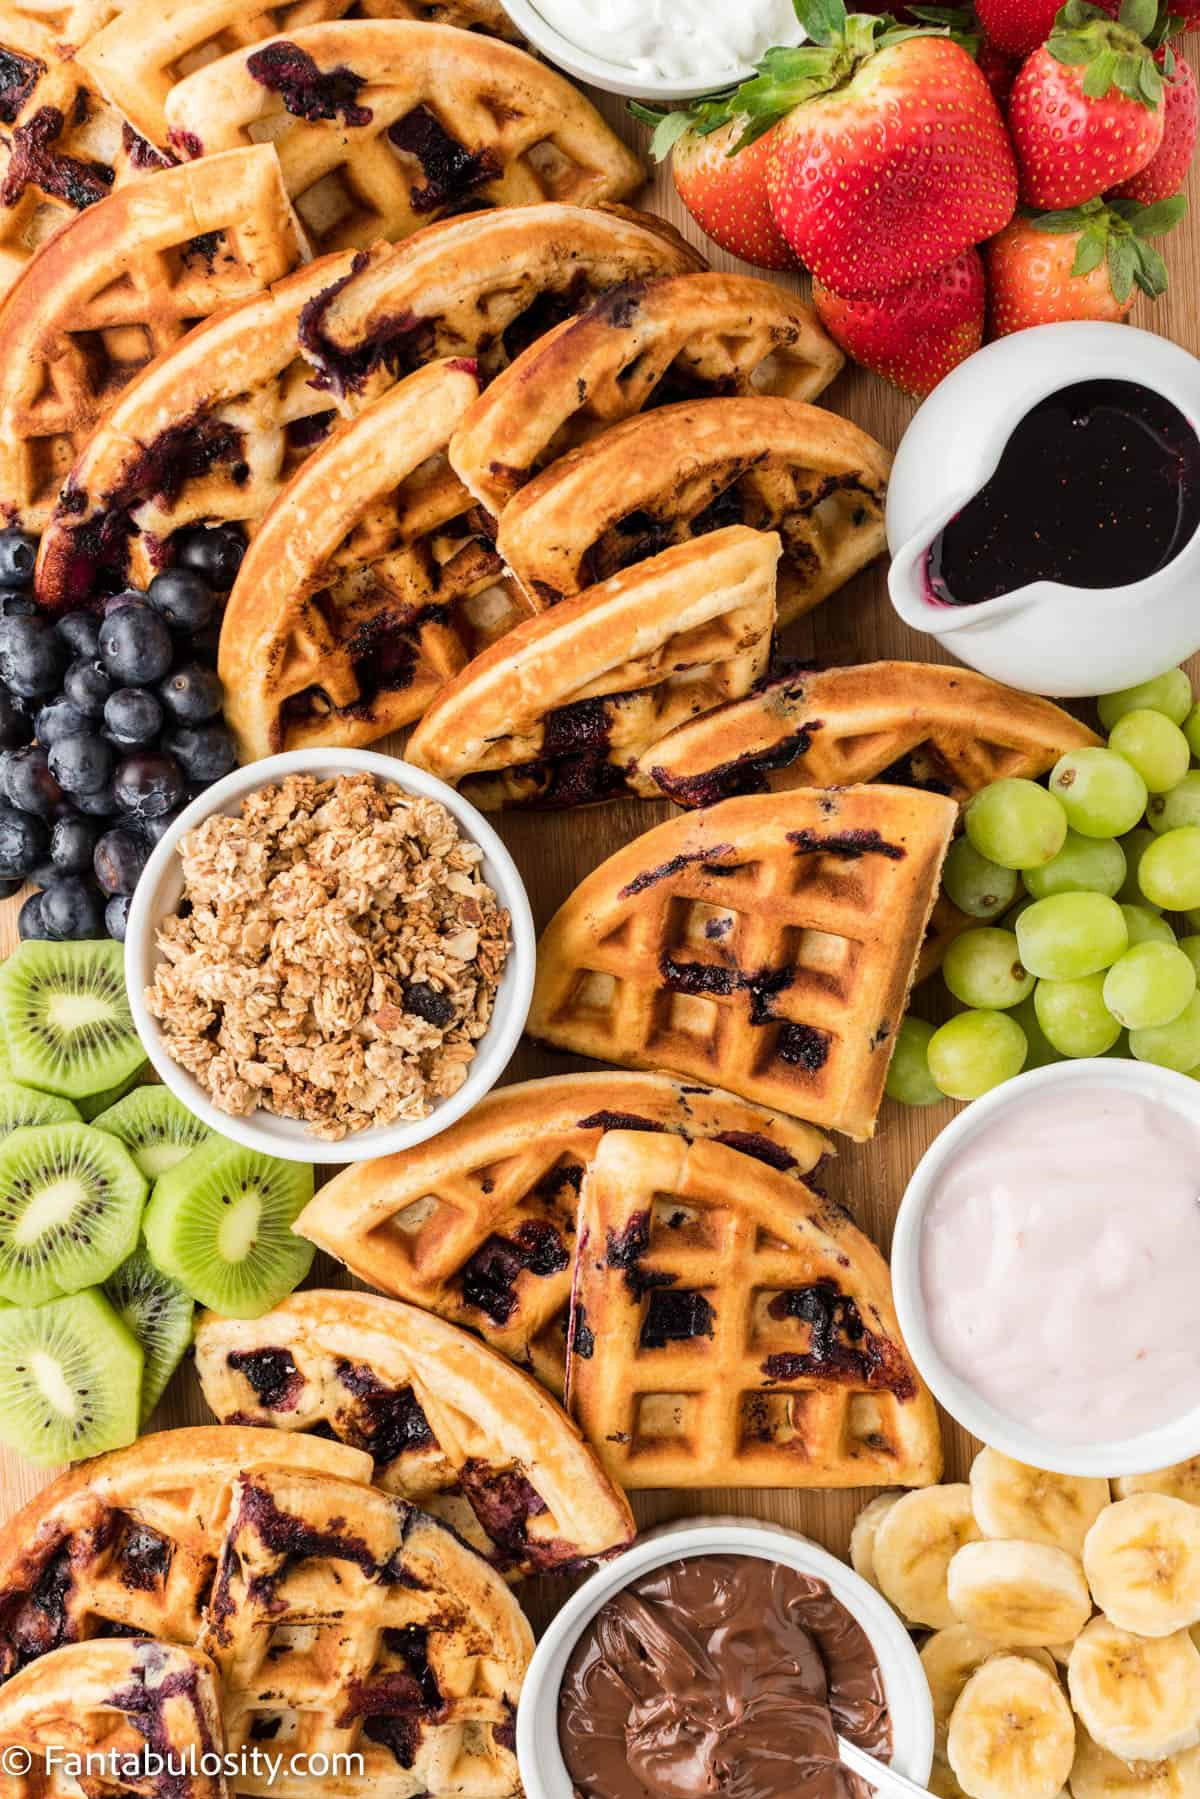 bluerberry waffles take center stage surrounded by fruit and jam on this board from fantabulosity.